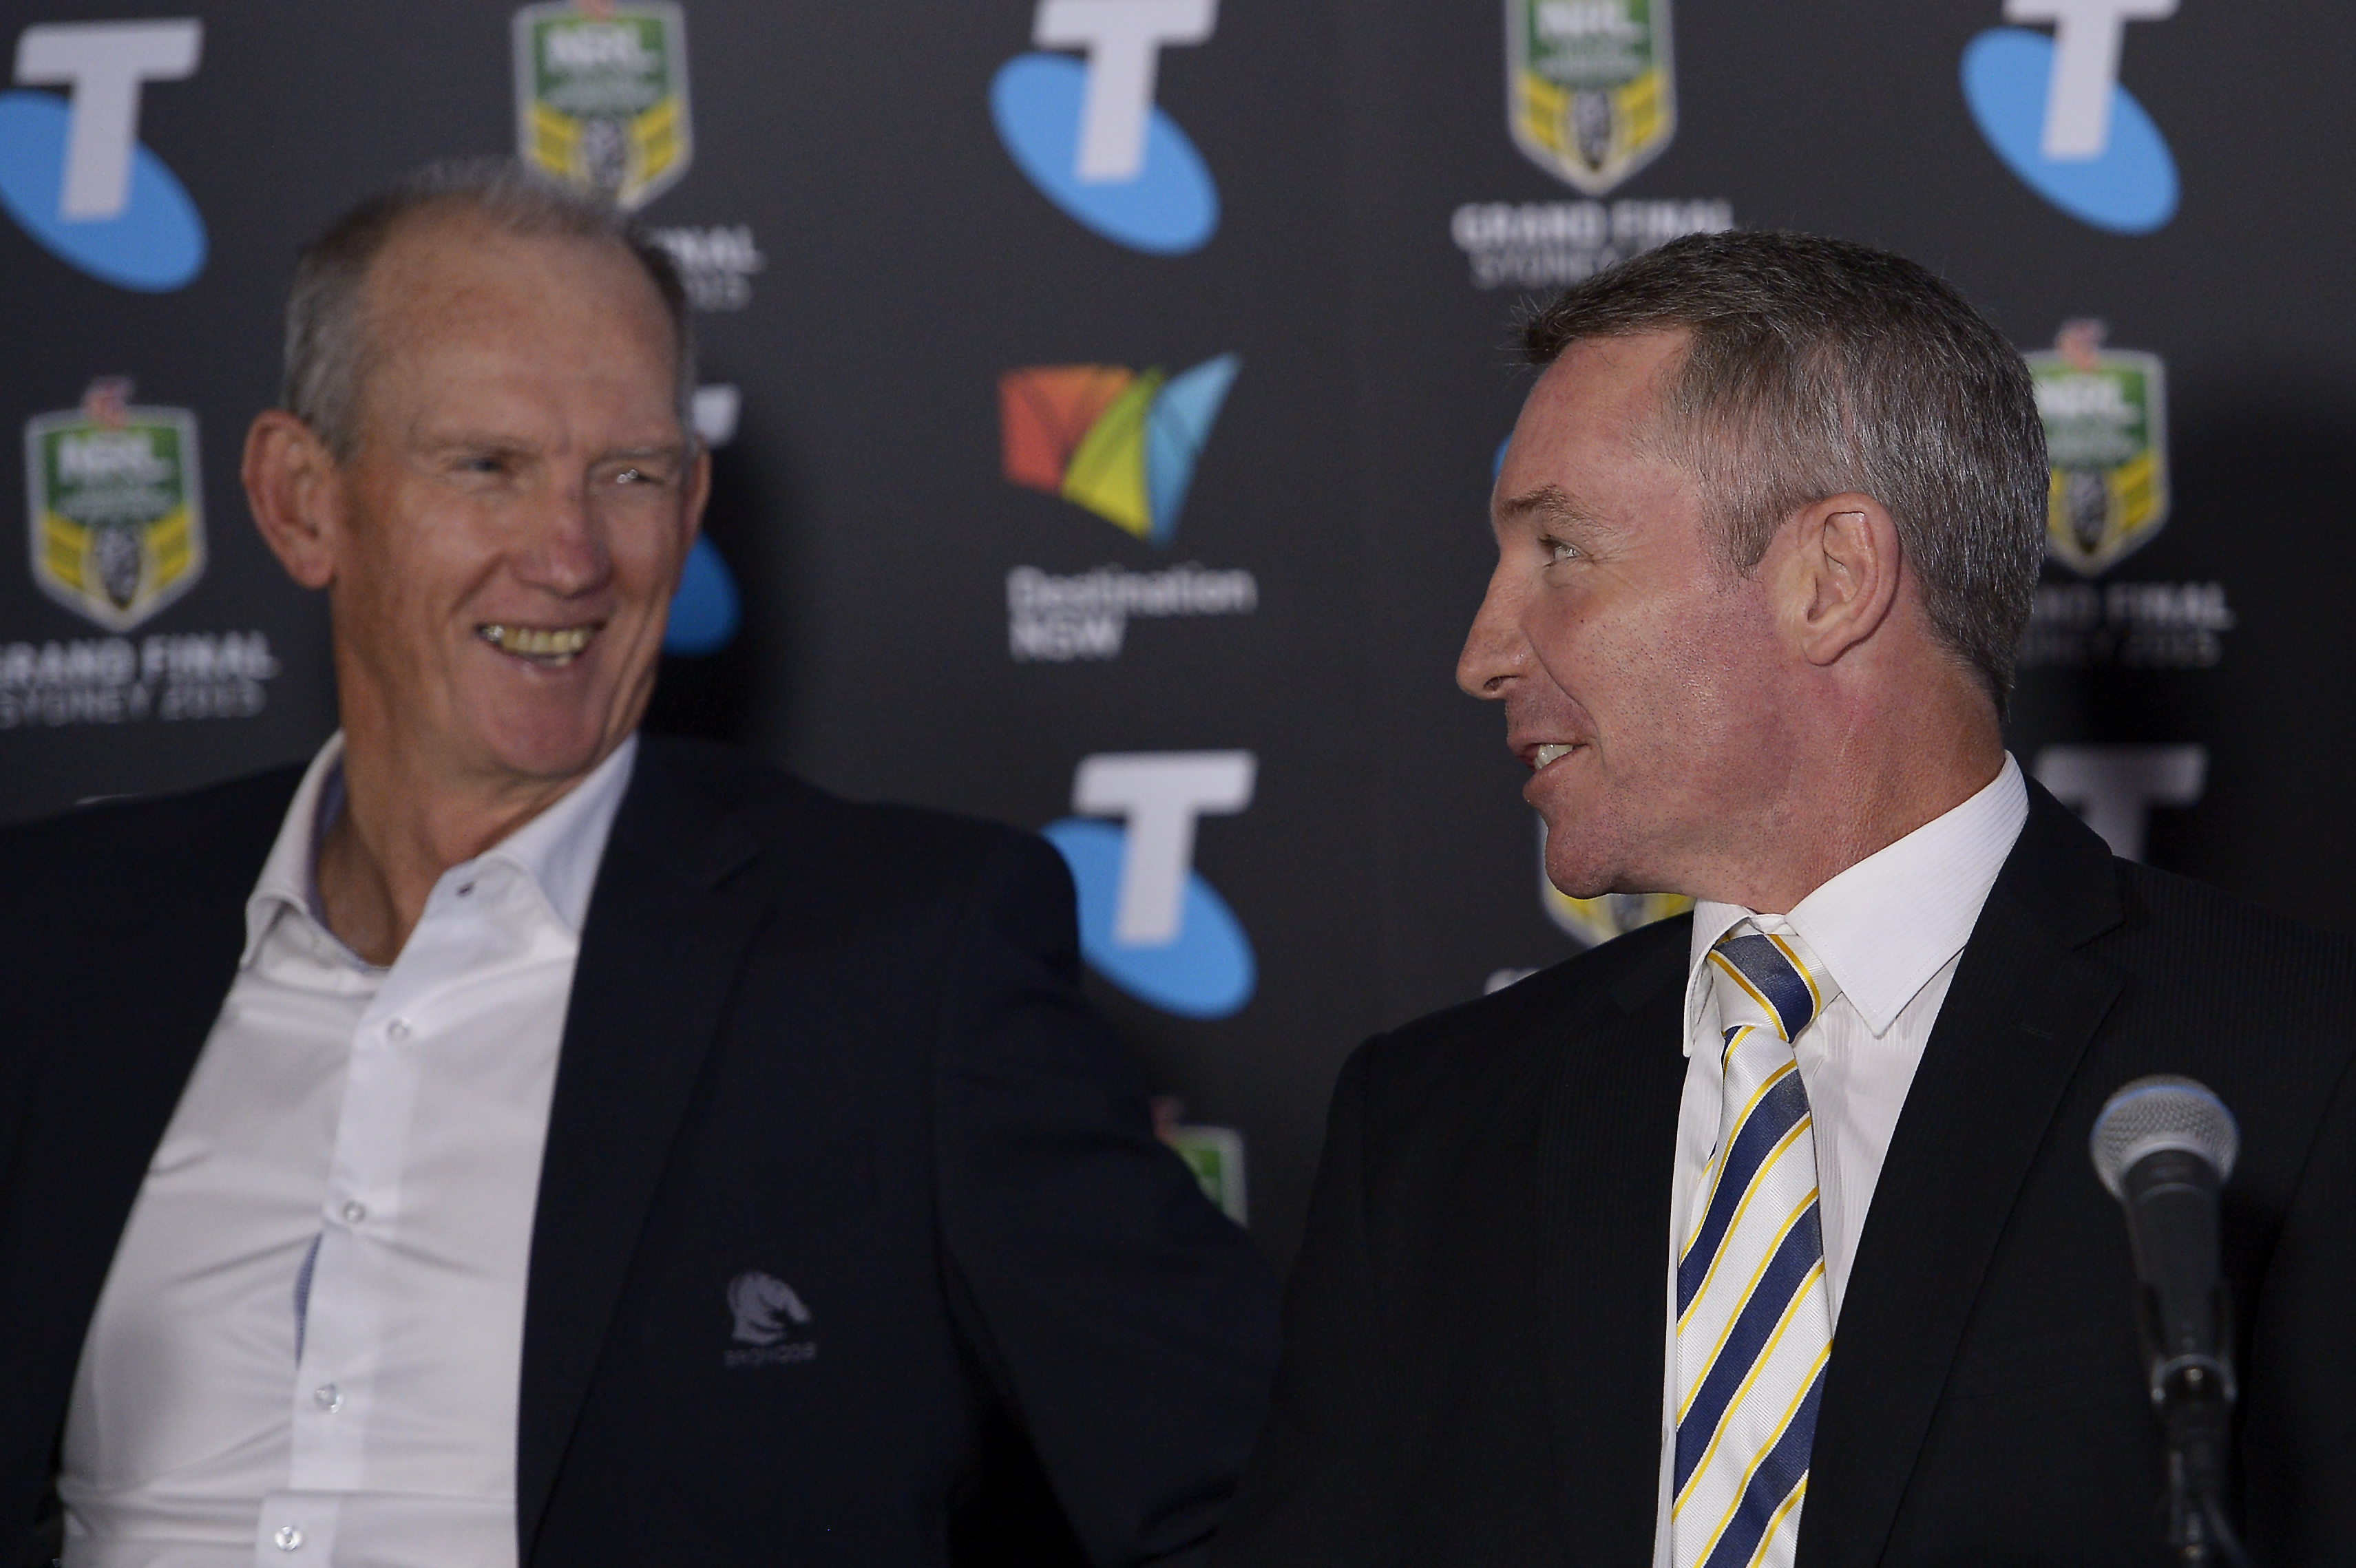 Wayne Bennett and Paul Green speak during the official 2015 NRL Grand Final press conference.